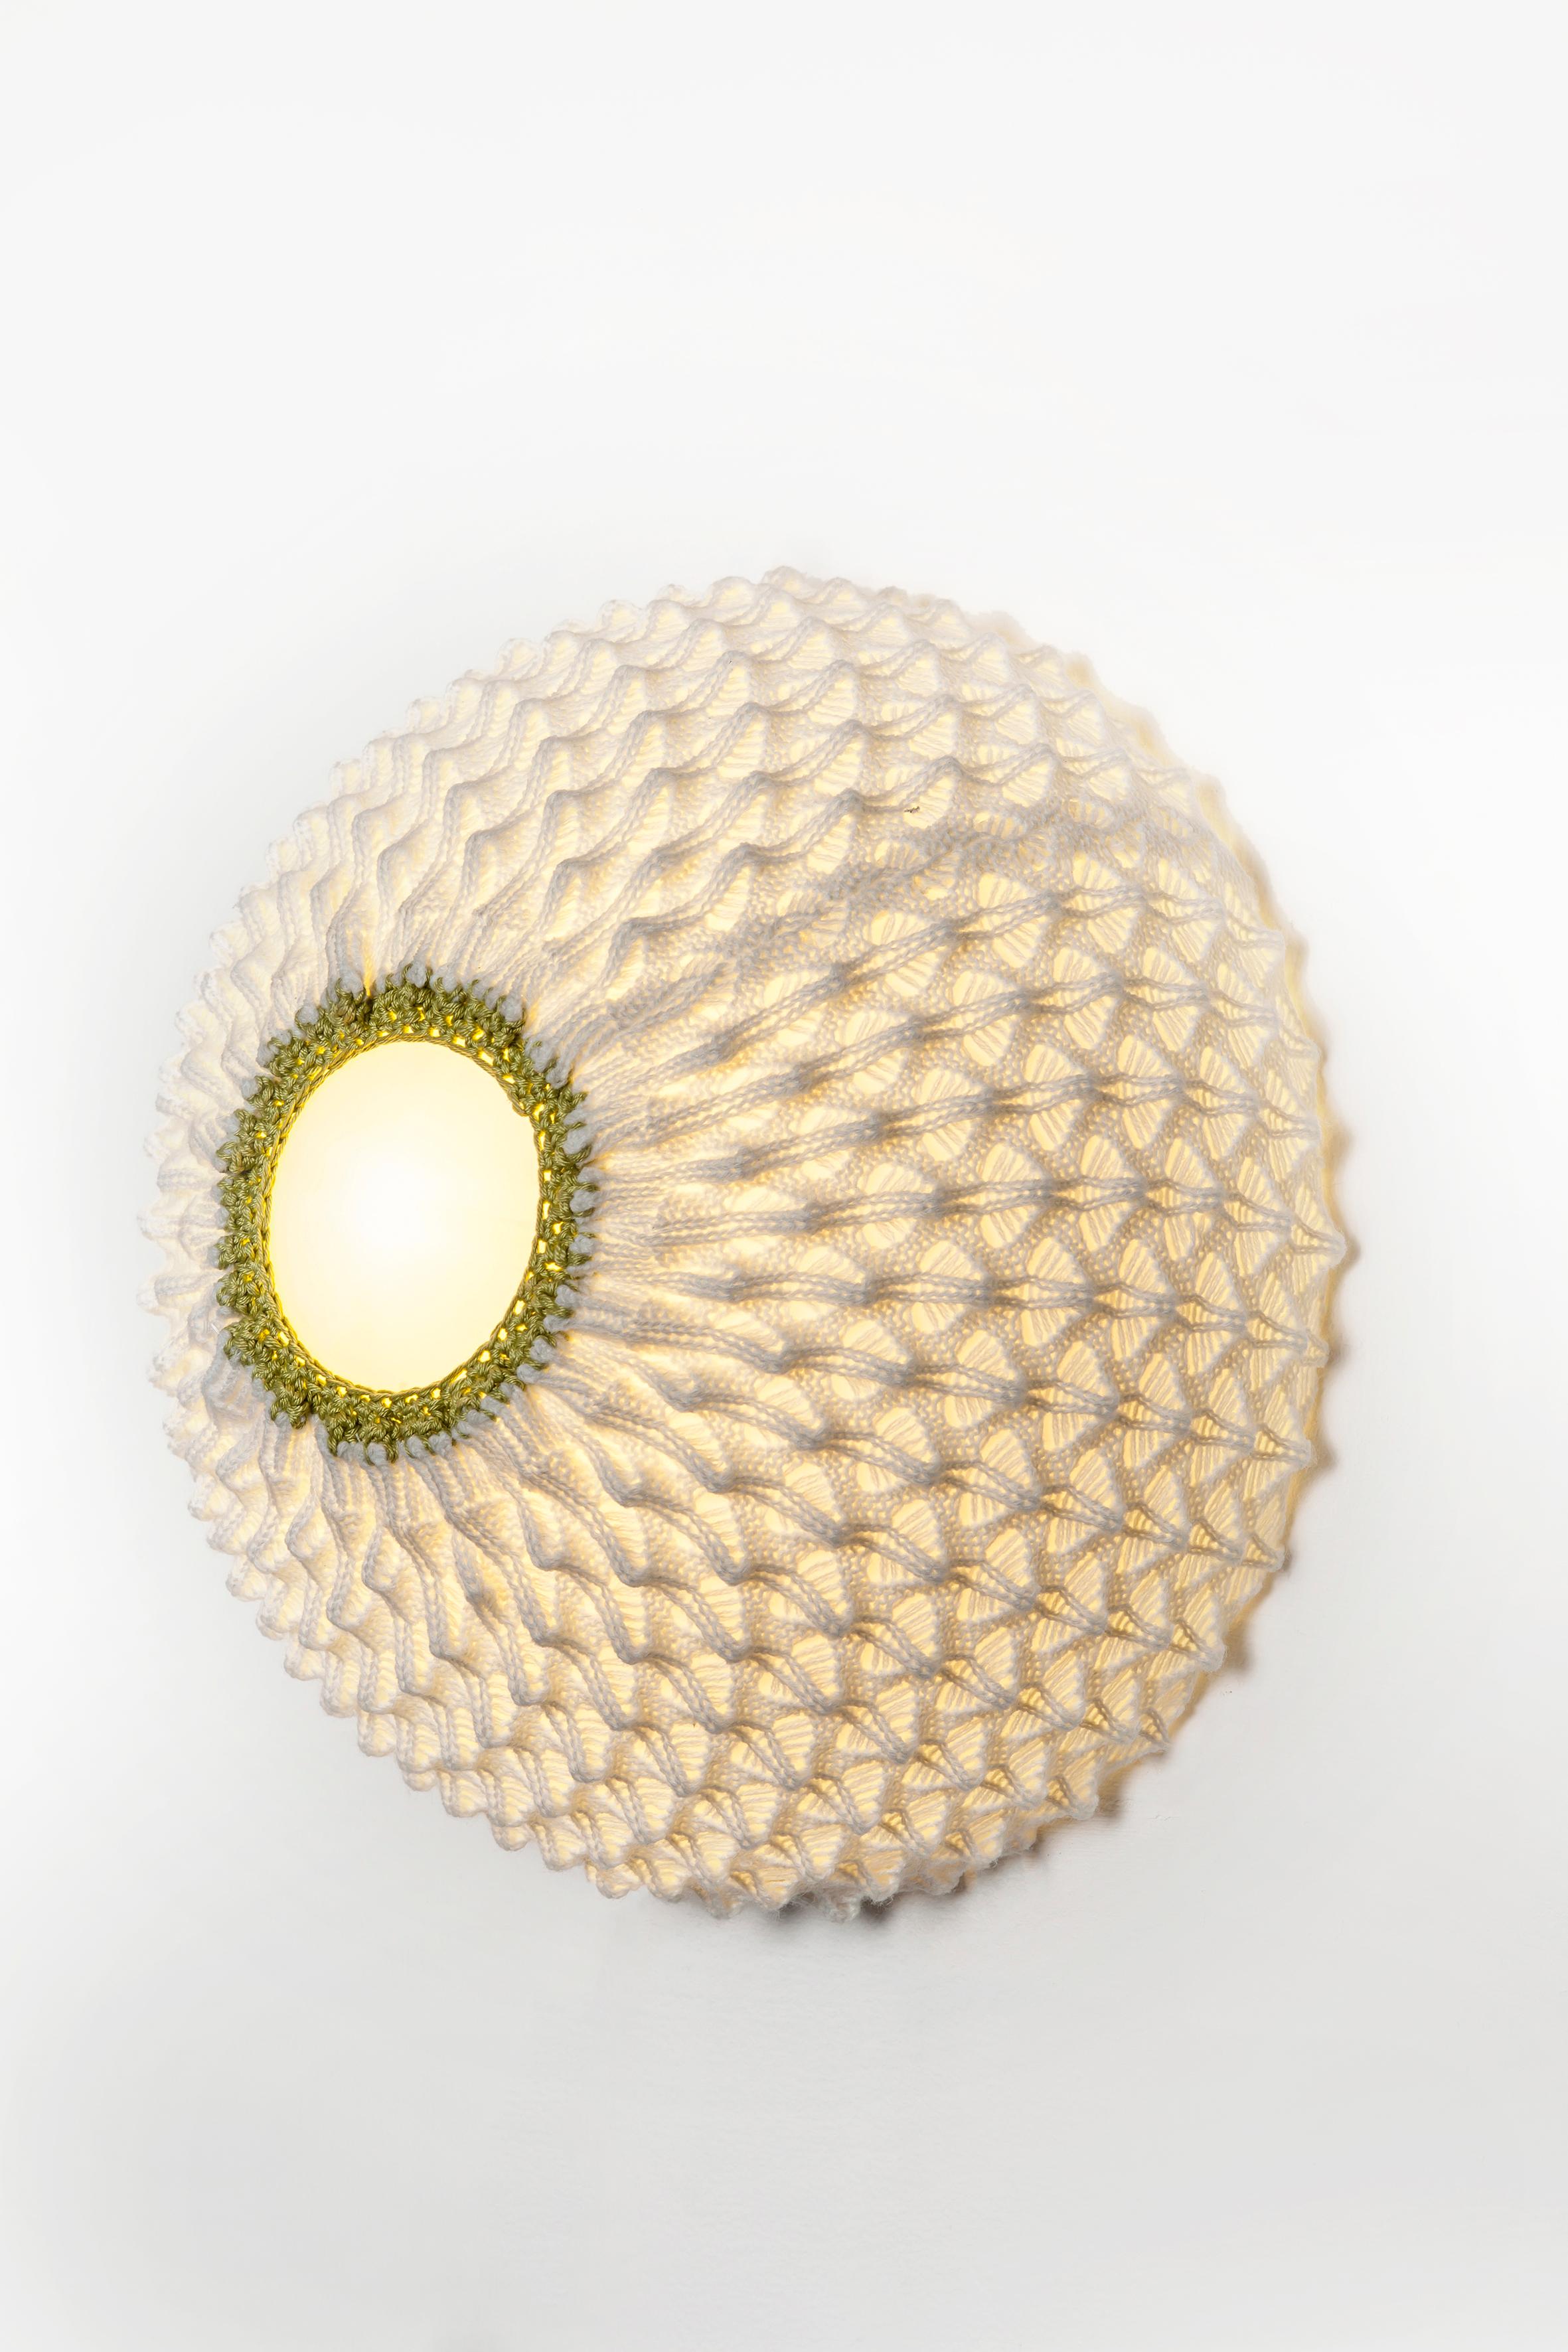 Machine-Made KNITTED wall light - contemporary design -cream color Small size For Sale